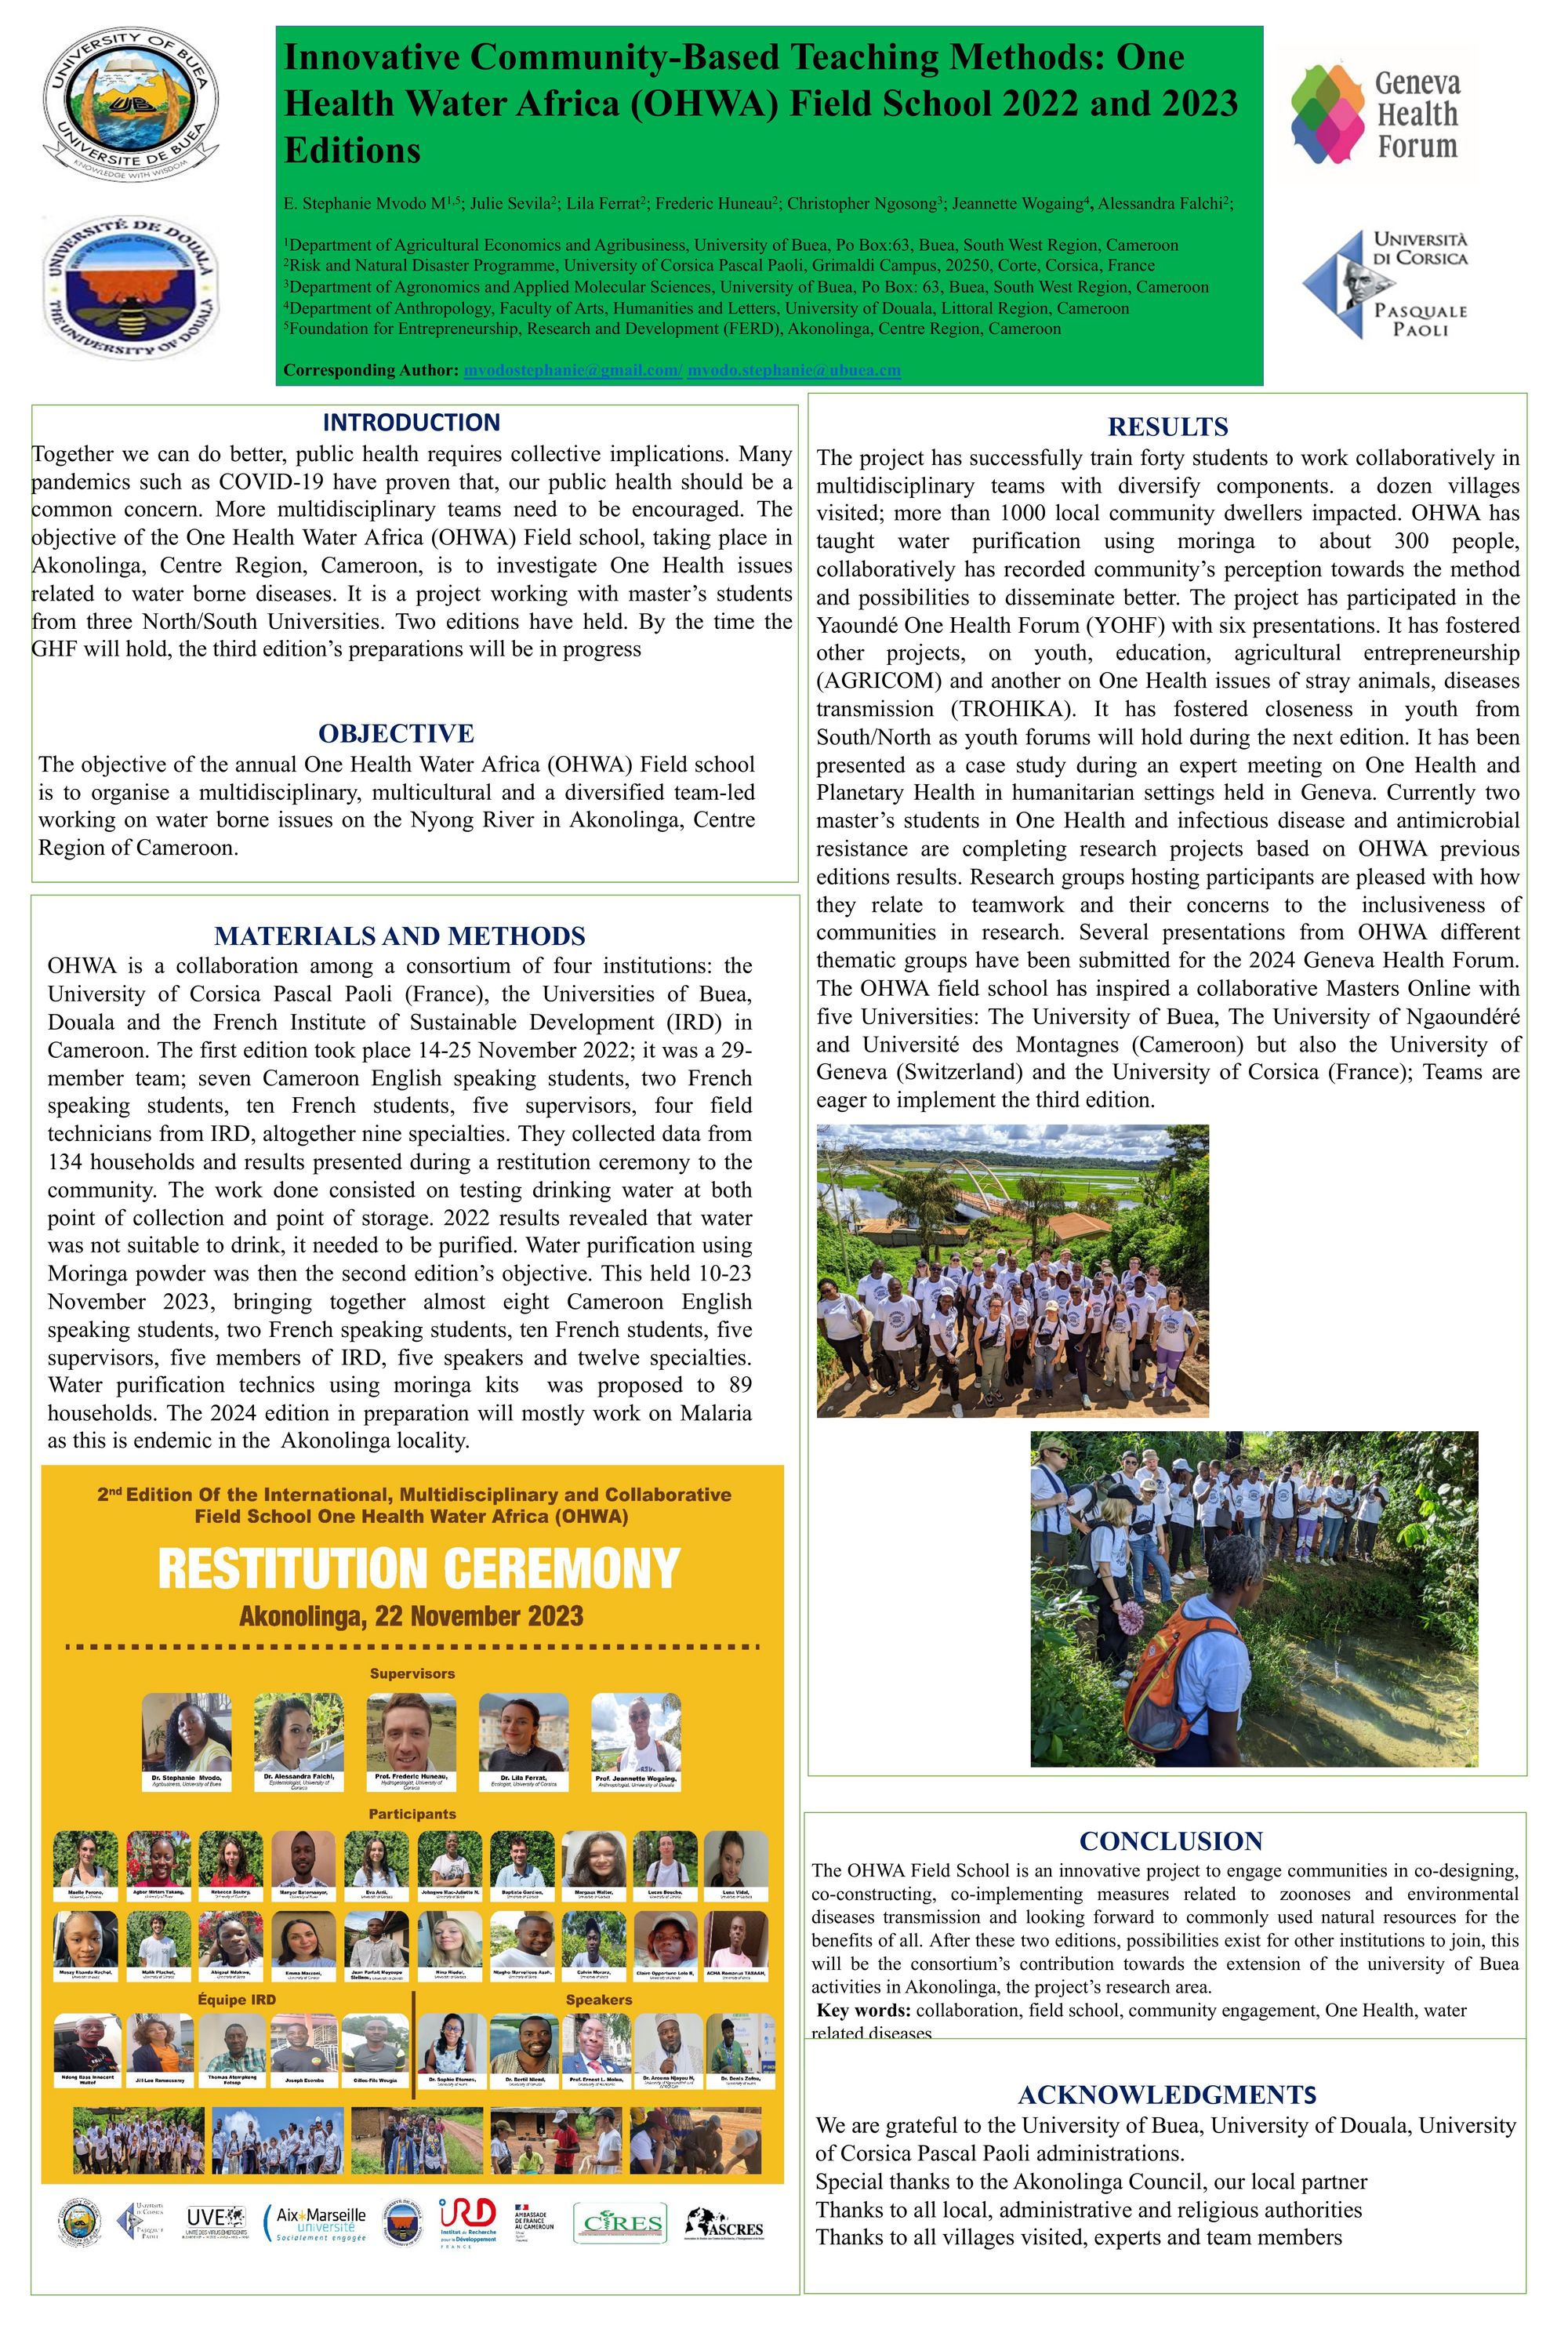 Innovative Community-Based Teaching Methods: One Health Water Africa (OHWA) Field School 2022 and 2023 Editions